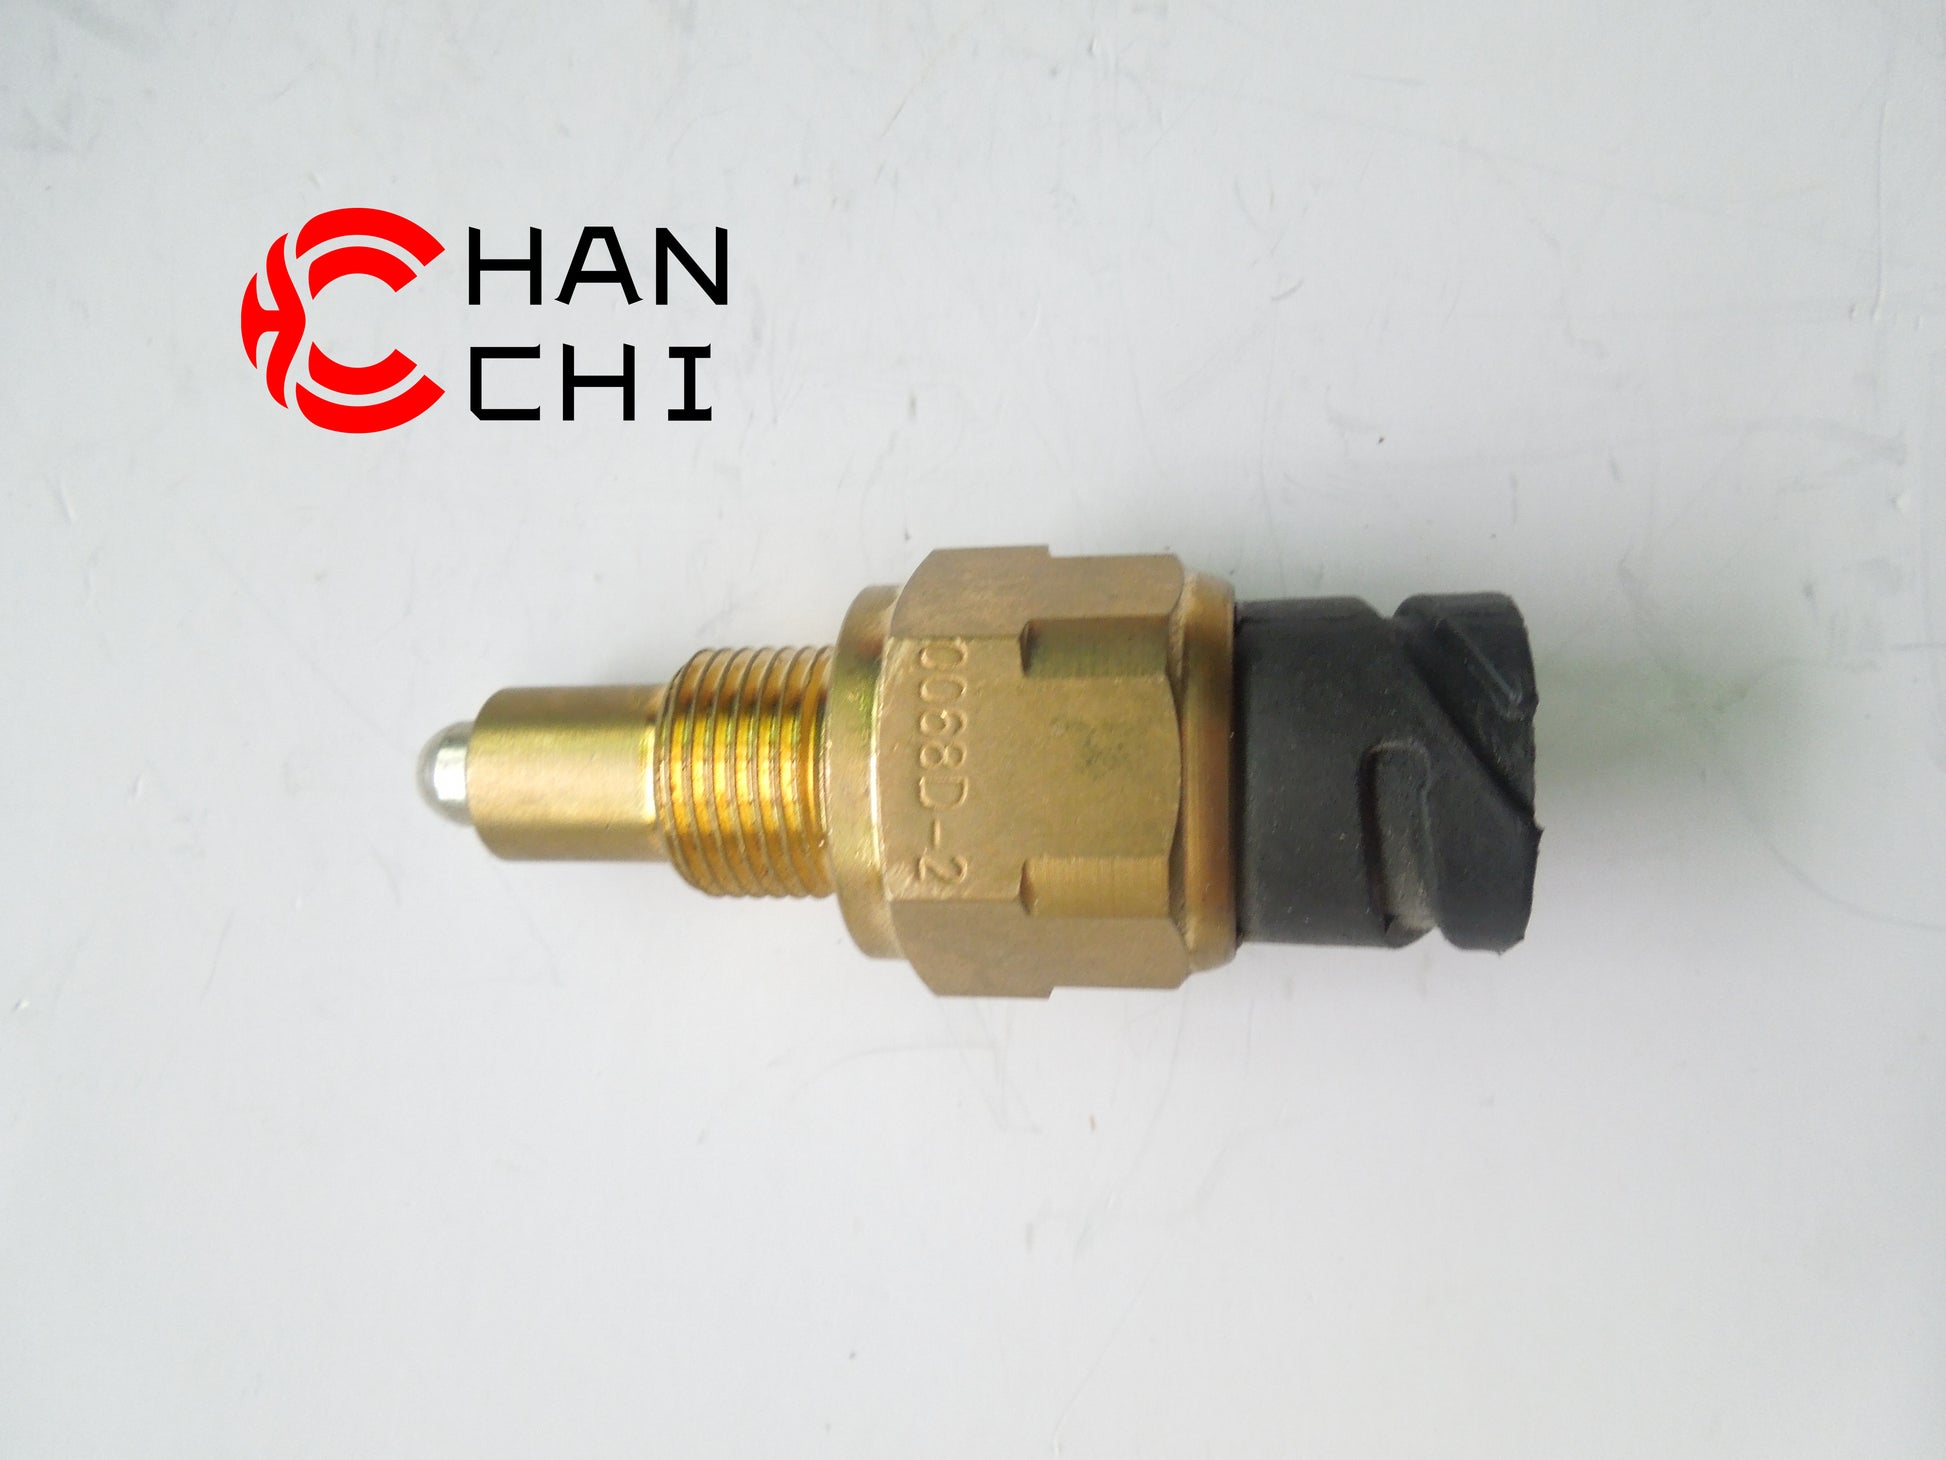 OEM: 0068D-2 FASTMaterial: metalColor: black goldenOrigin: Made in ChinaWeight: 50gPacking List: 1* Reversing Light Switch More Service We can provide OEM Manufacturing service We can Be your one-step solution for Auto Parts We can provide technical scheme for you Feel Free to Contact Us, We will get back to you as soon as possible.